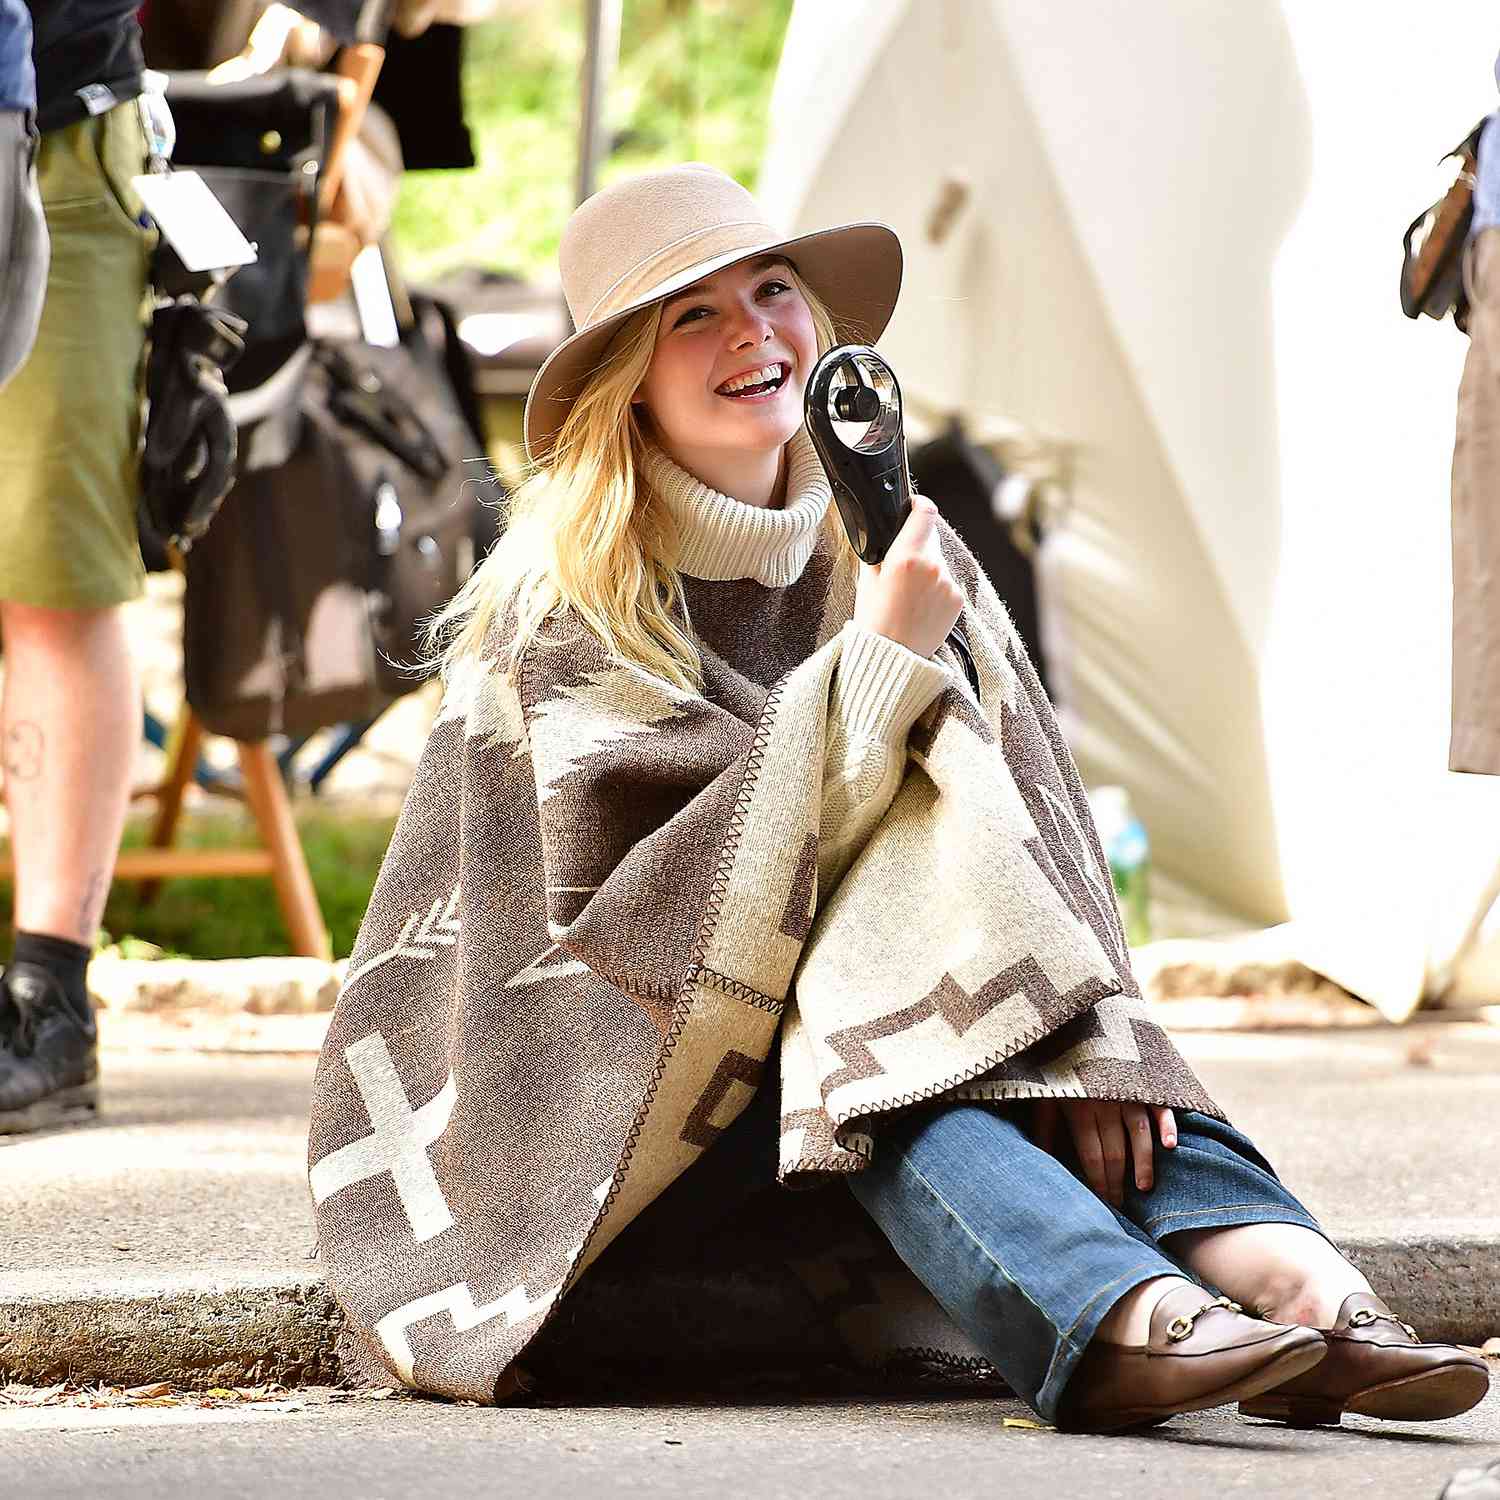 Elle Fanning on location for Woody Allen's untitled movie